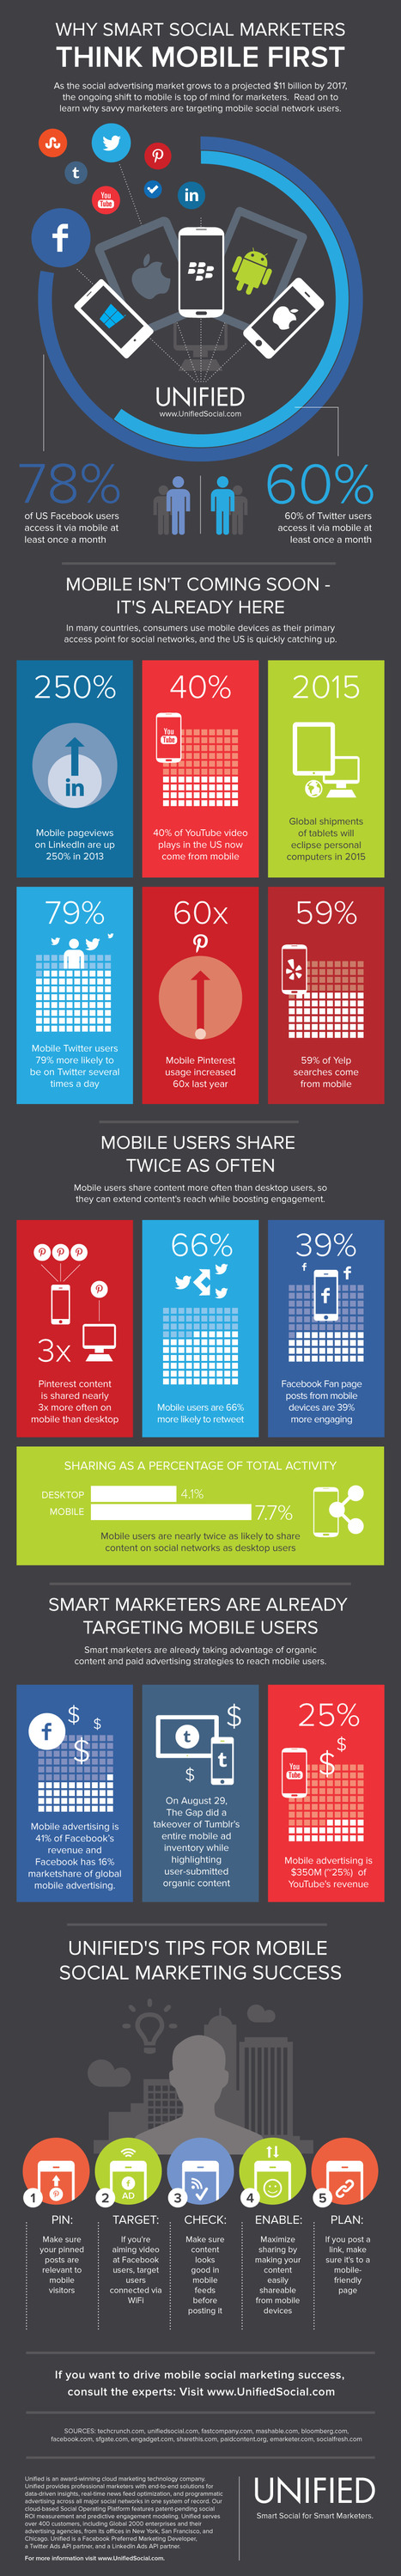 Why Smart Social Marketers Think Mobile First | E-Learning-Inclusivo (Mashup) | Scoop.it